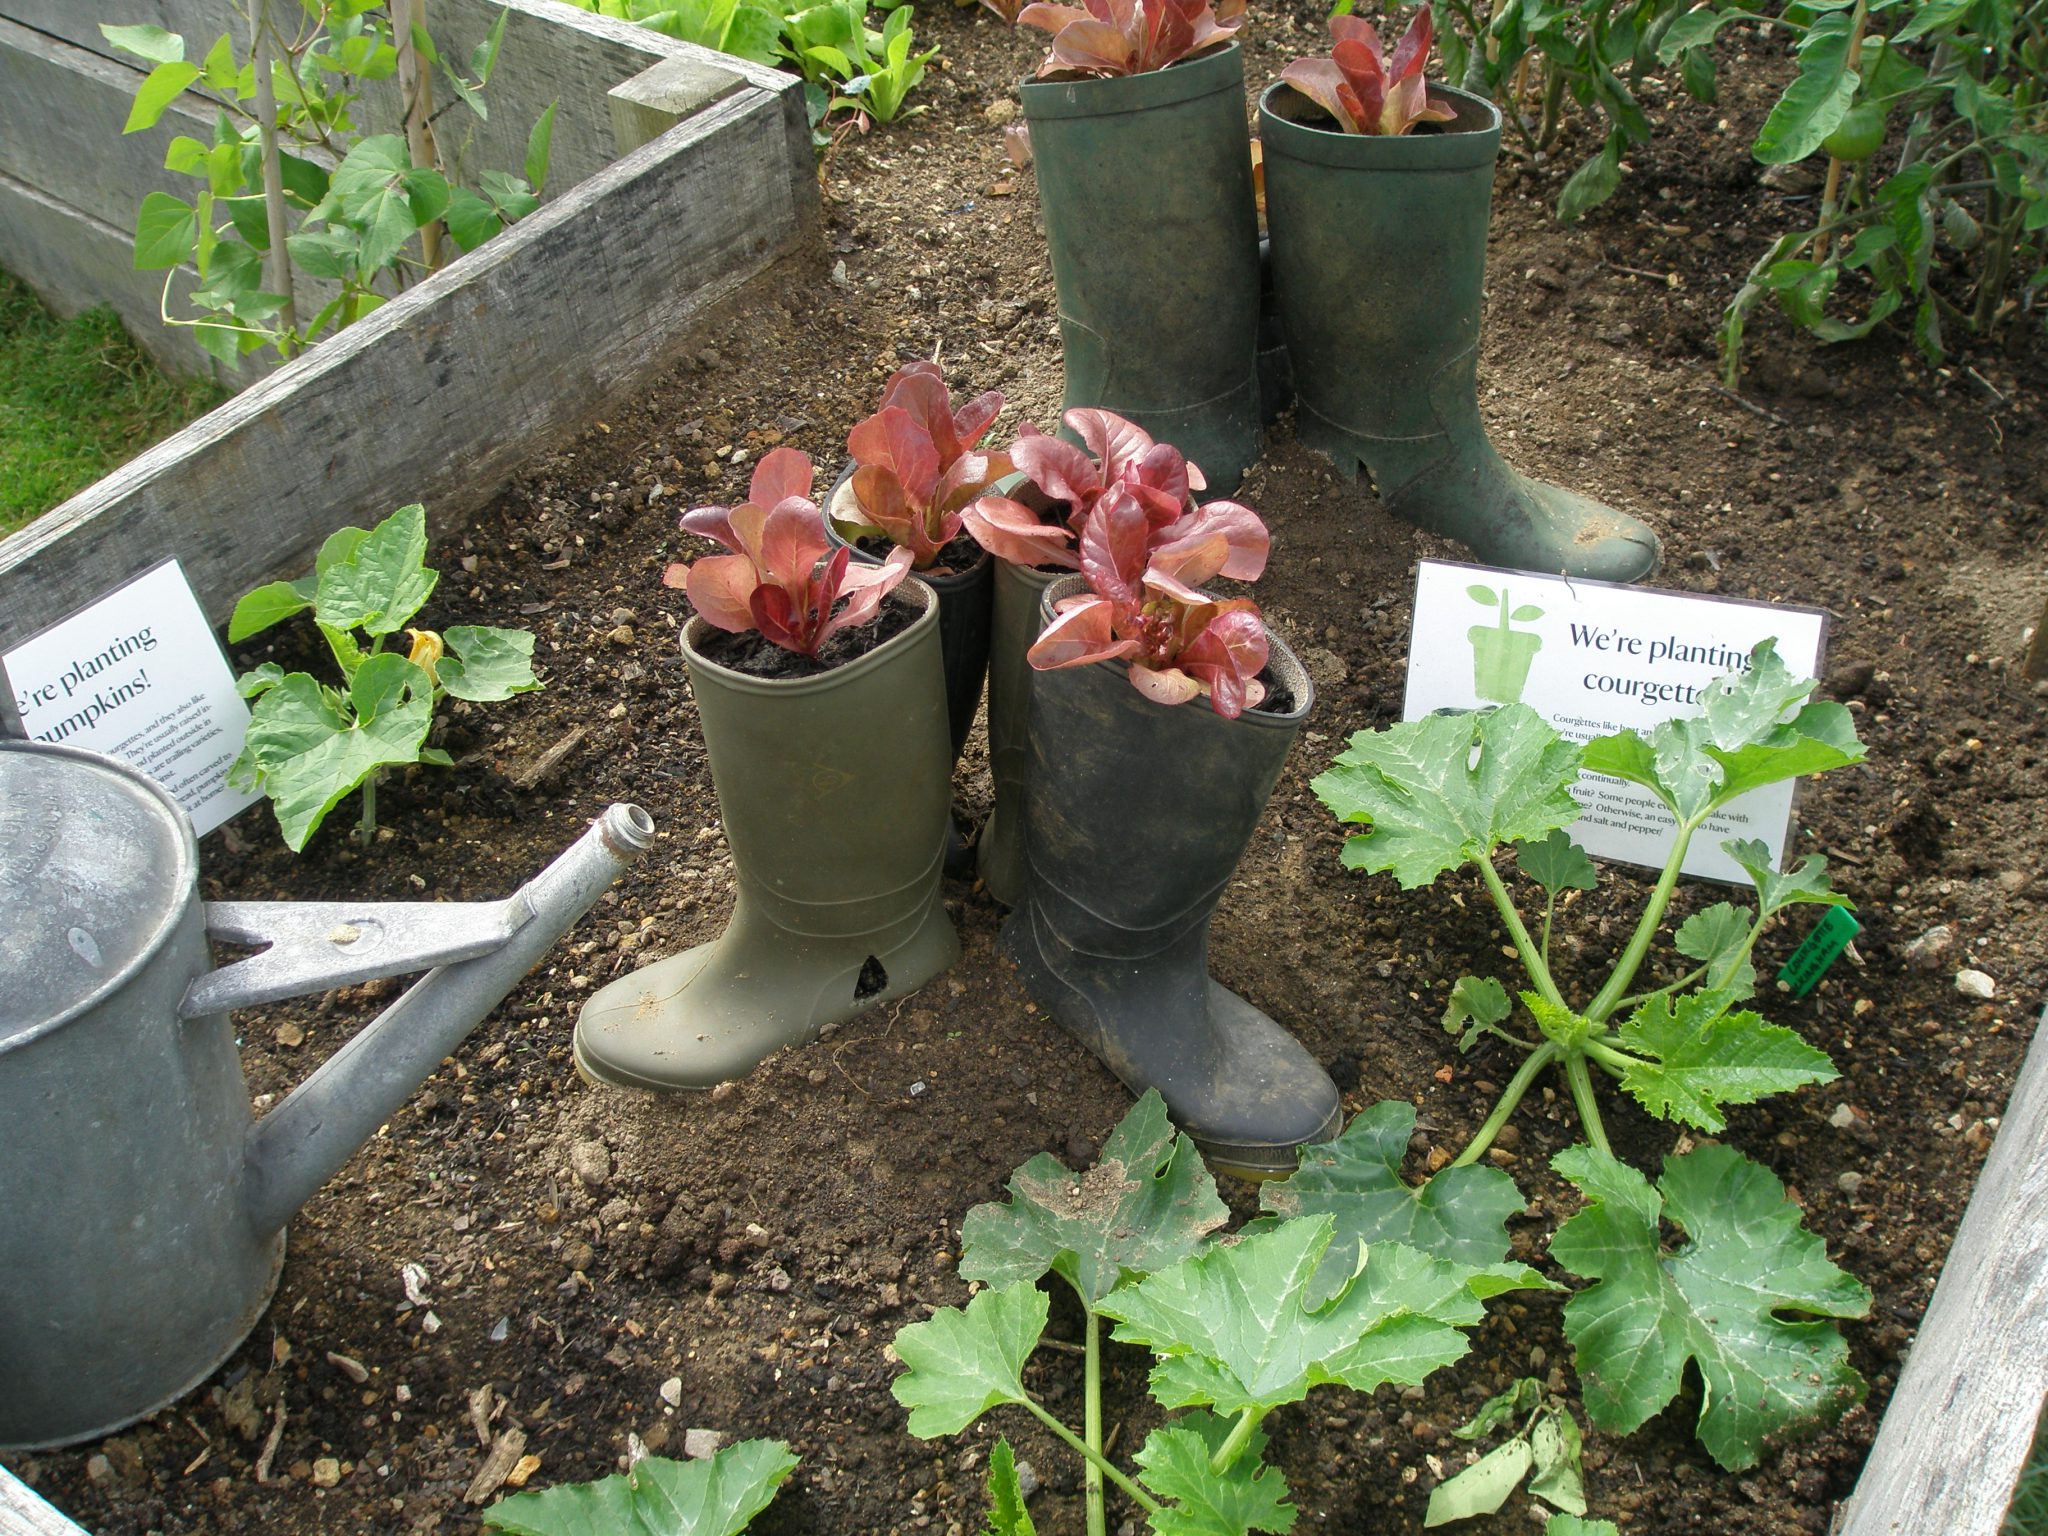 Boots--definitely not Winston's--are recycled as planters for lettuce.